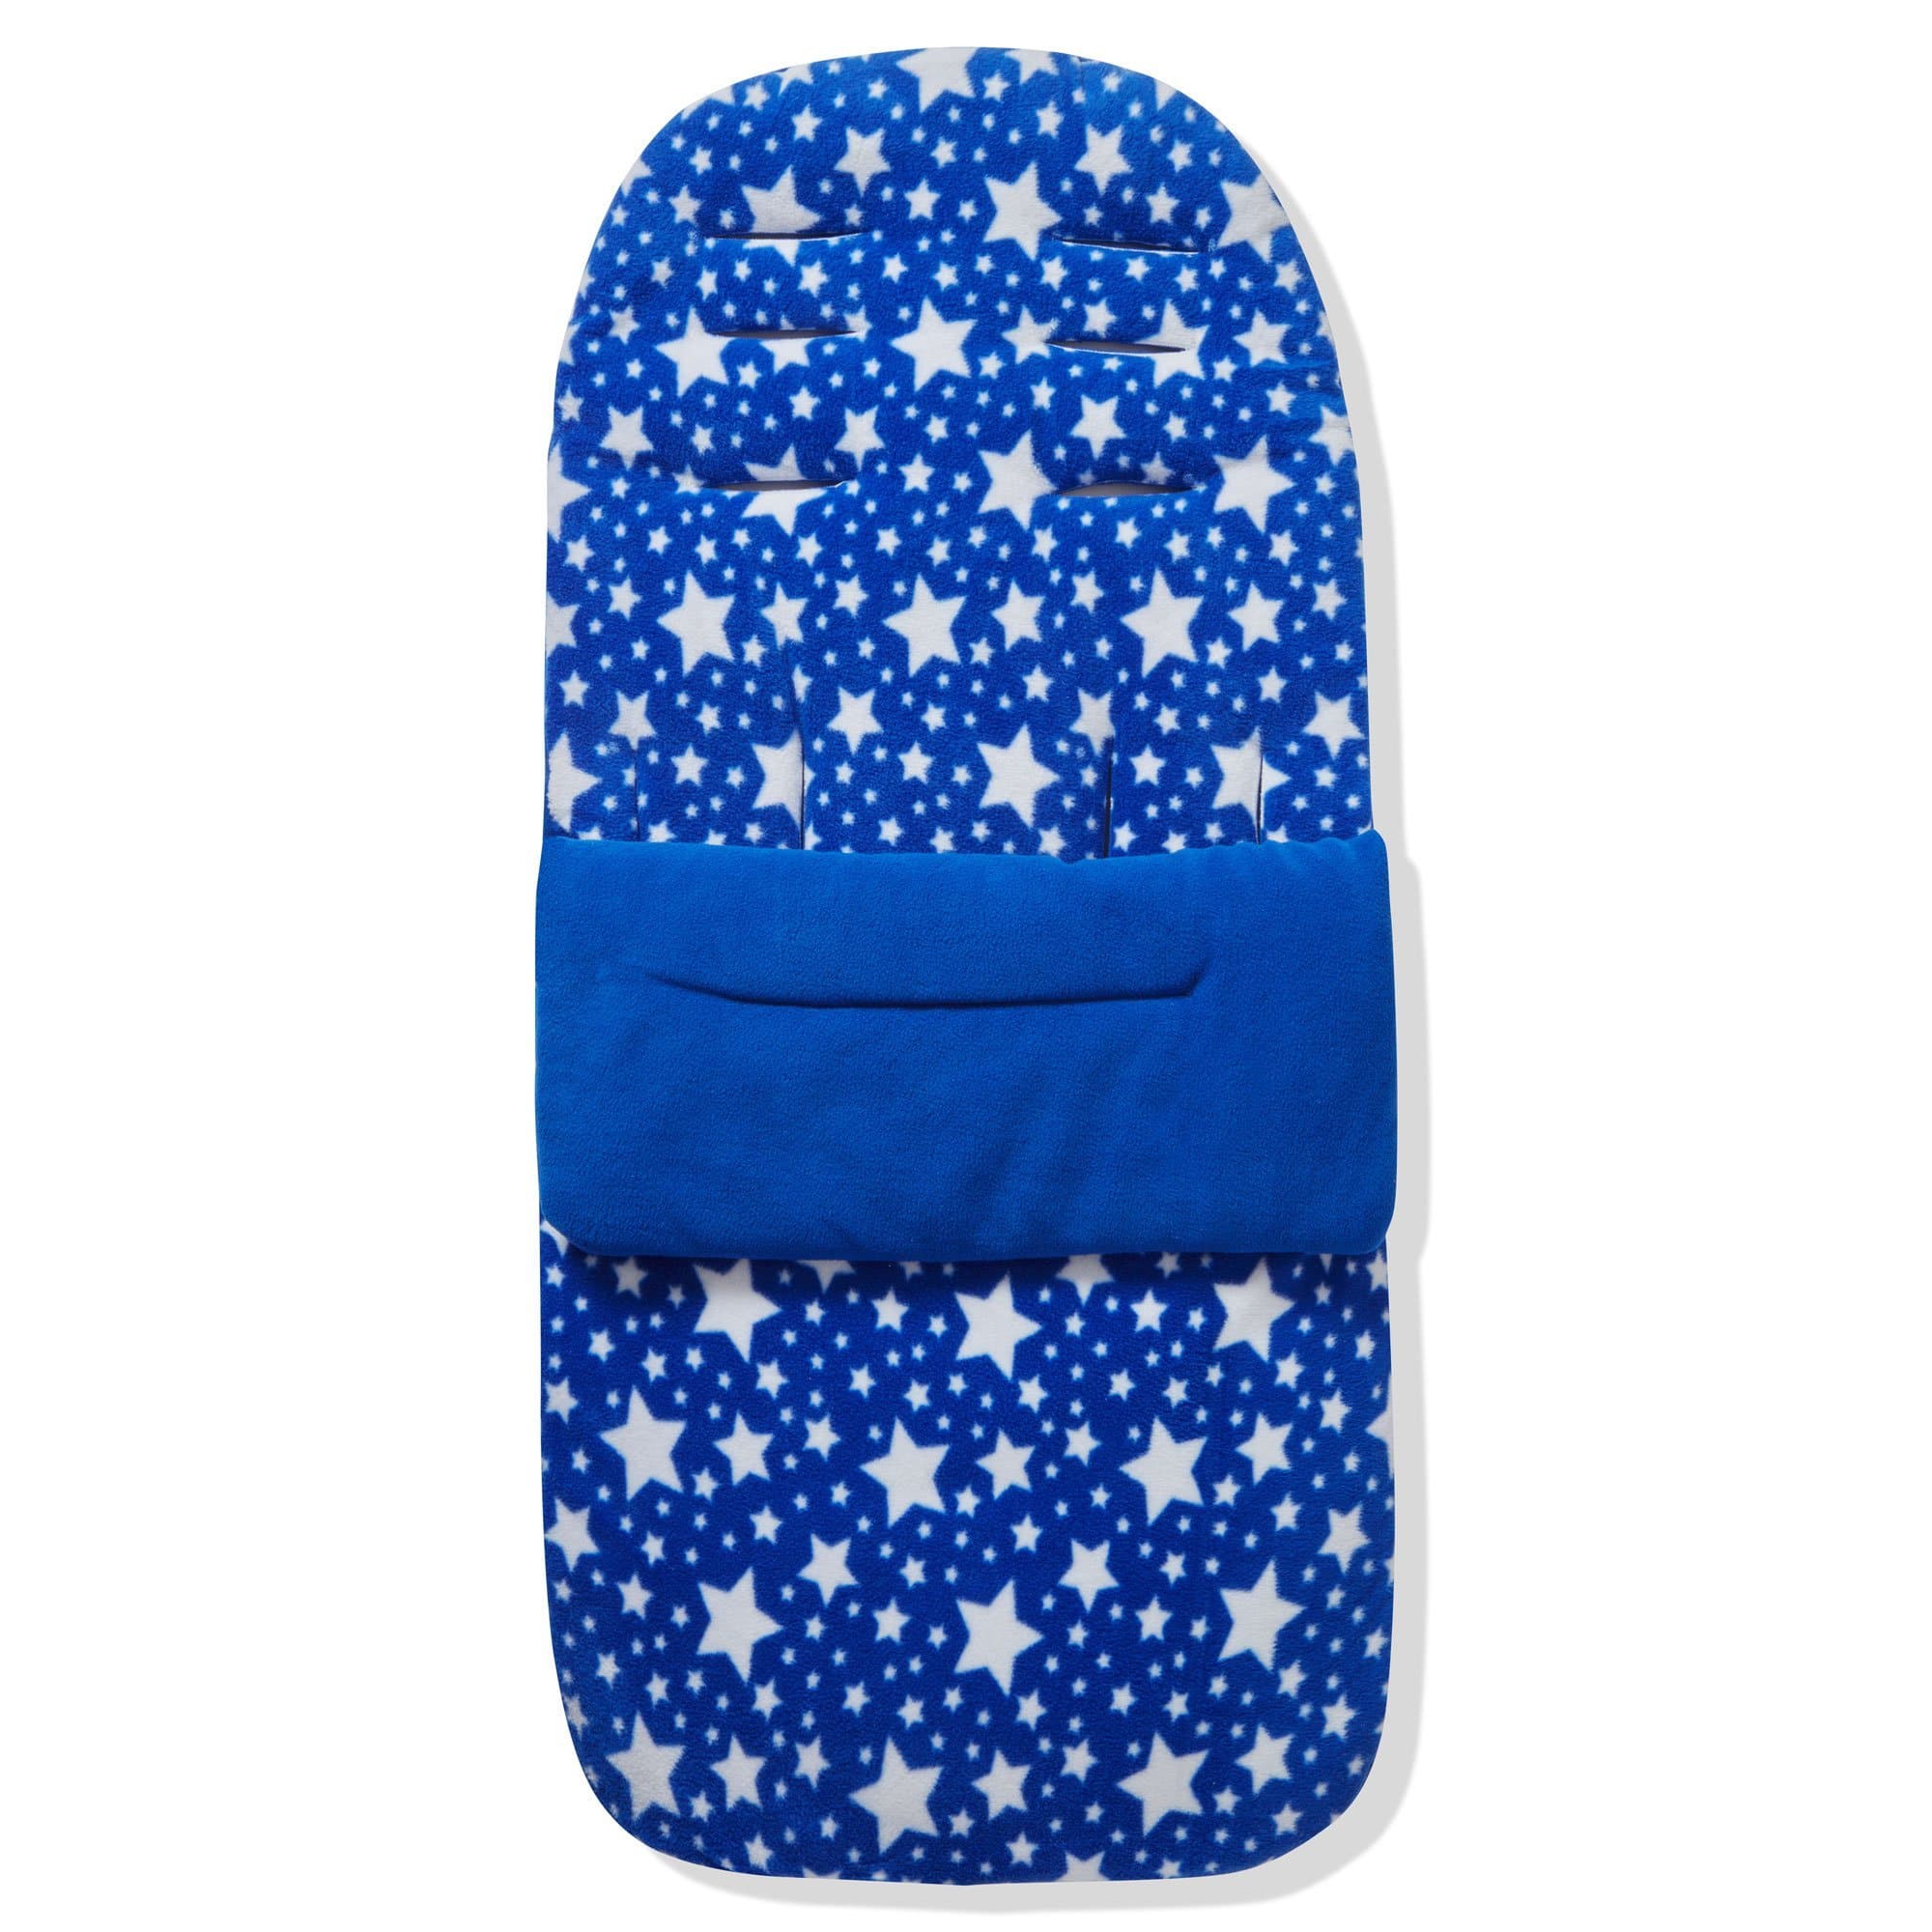 Fleece Footmuff / Cosy Toes Compatible with Urban Detour - Blue Star / Fits All Models | For Your Little One